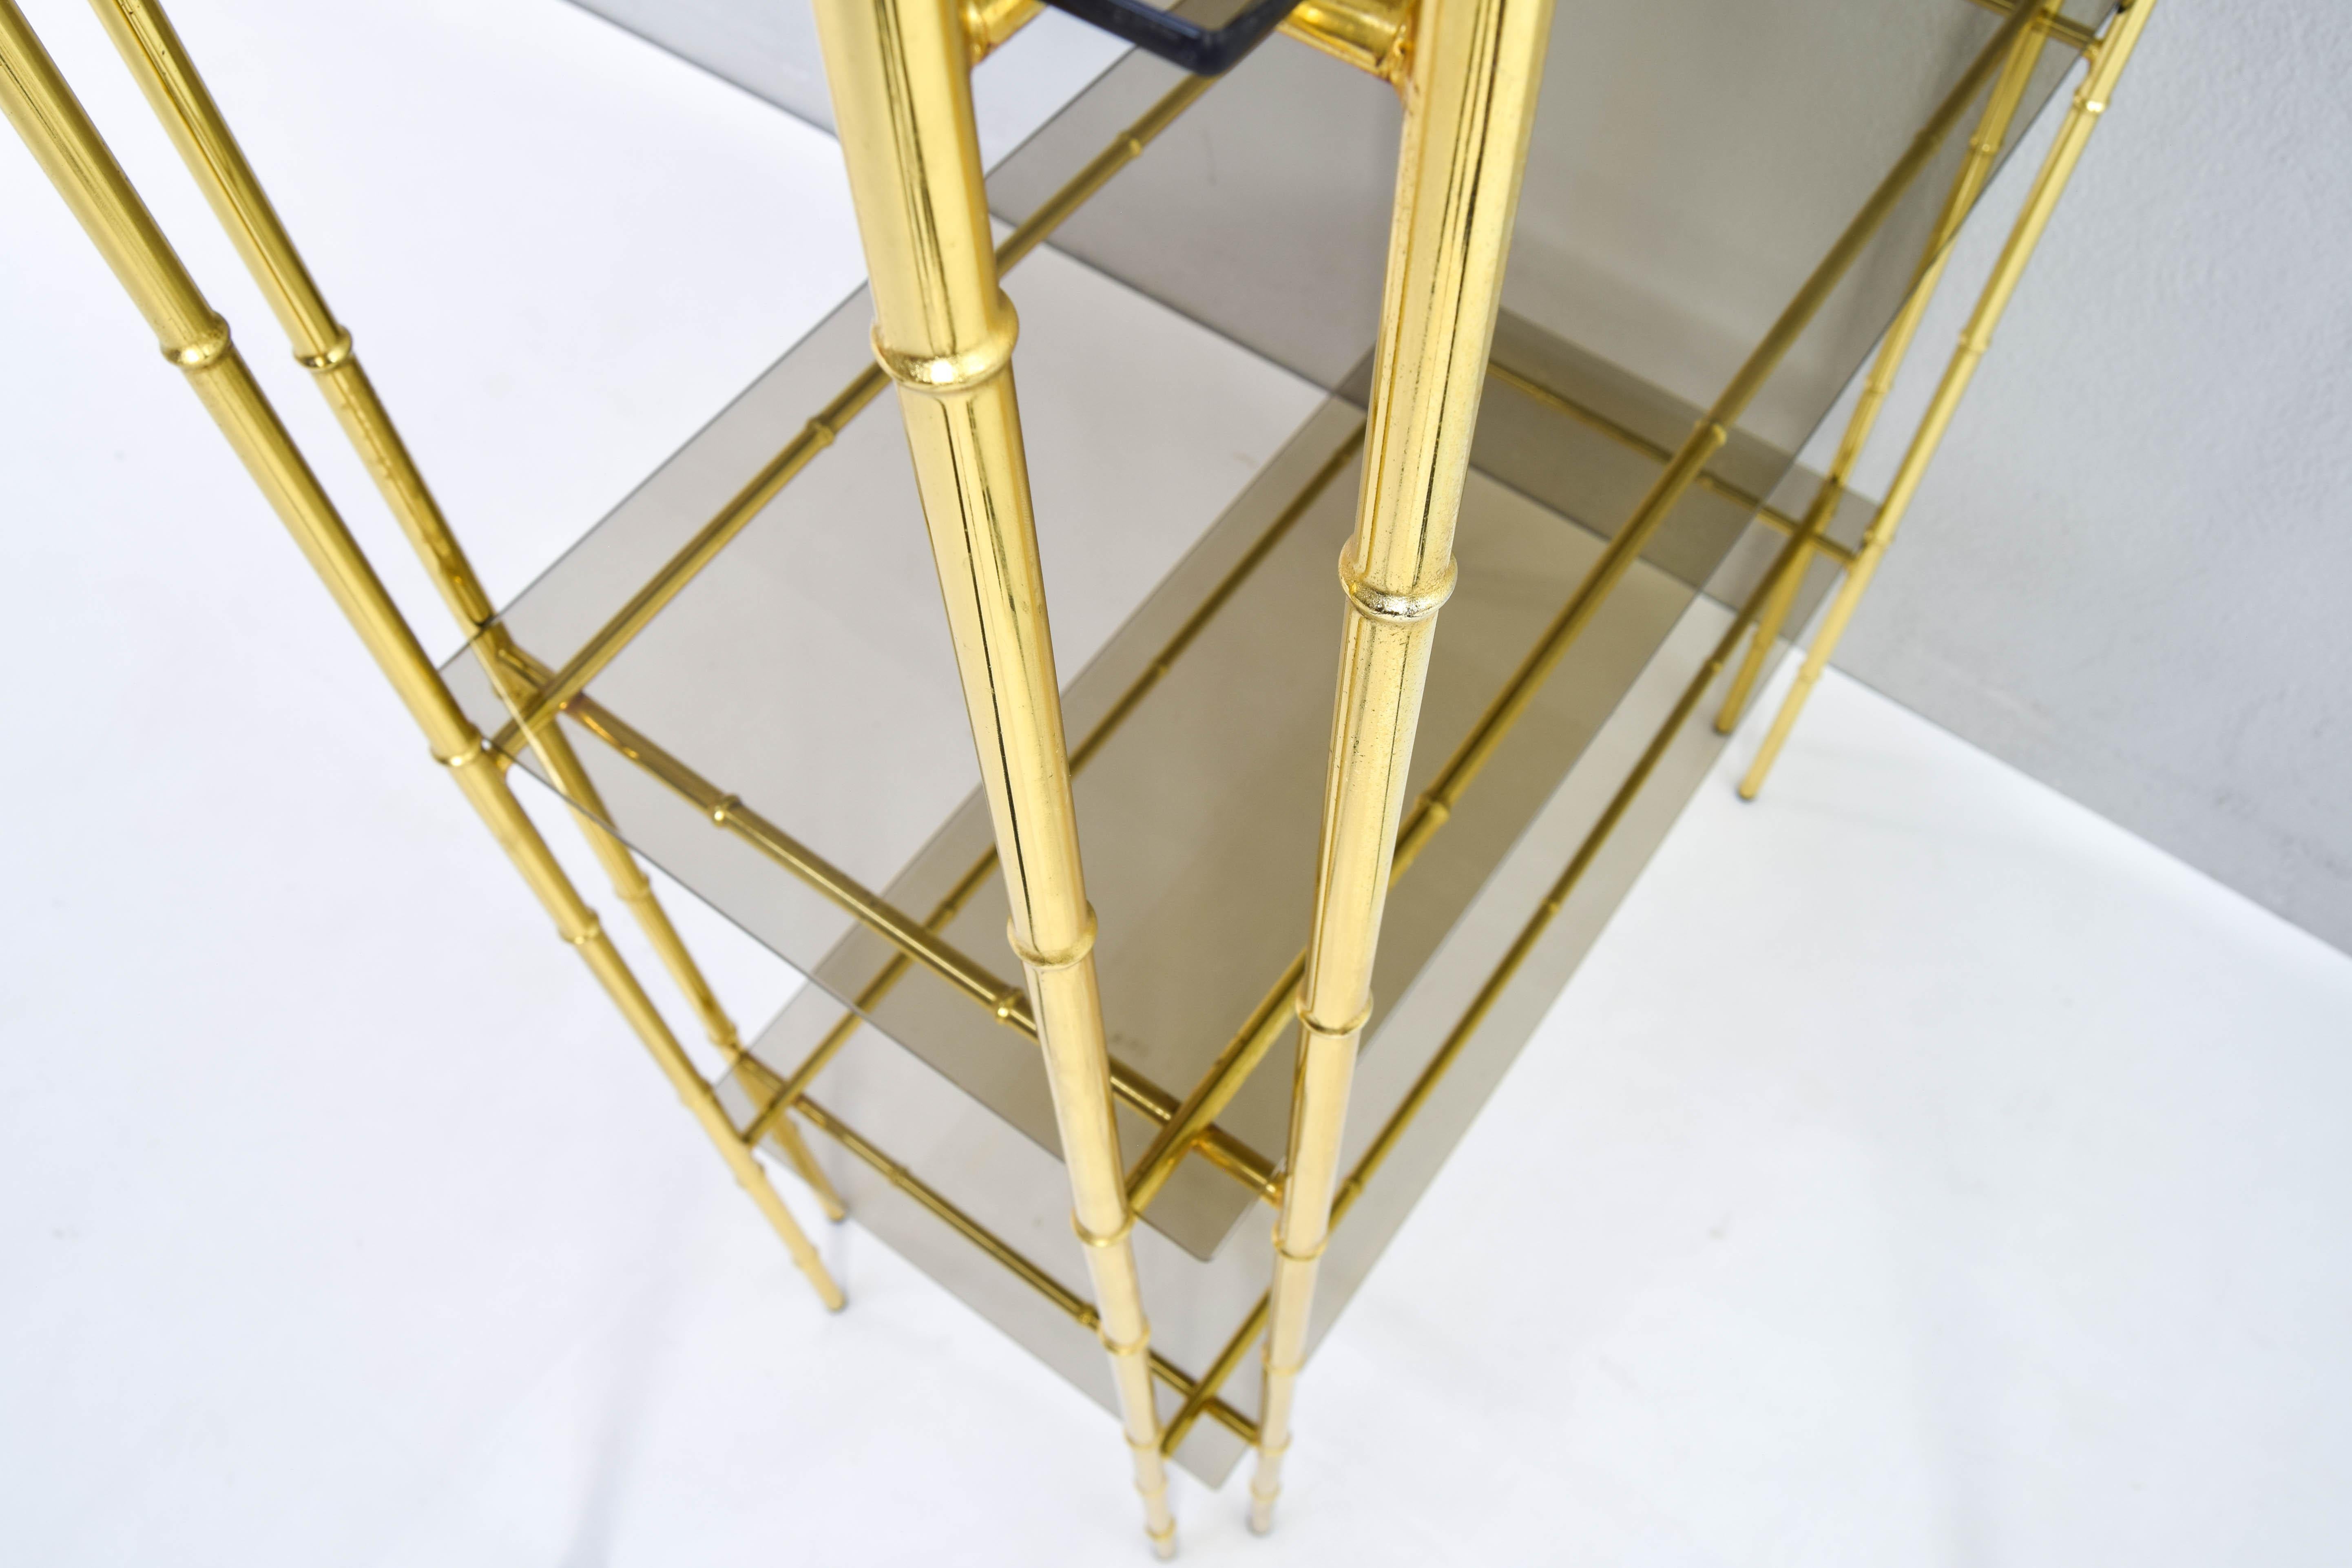 Hollywood Regency Bamboo Shelf Gold Plated and Smoked Glass, Manises Spain 70s 3